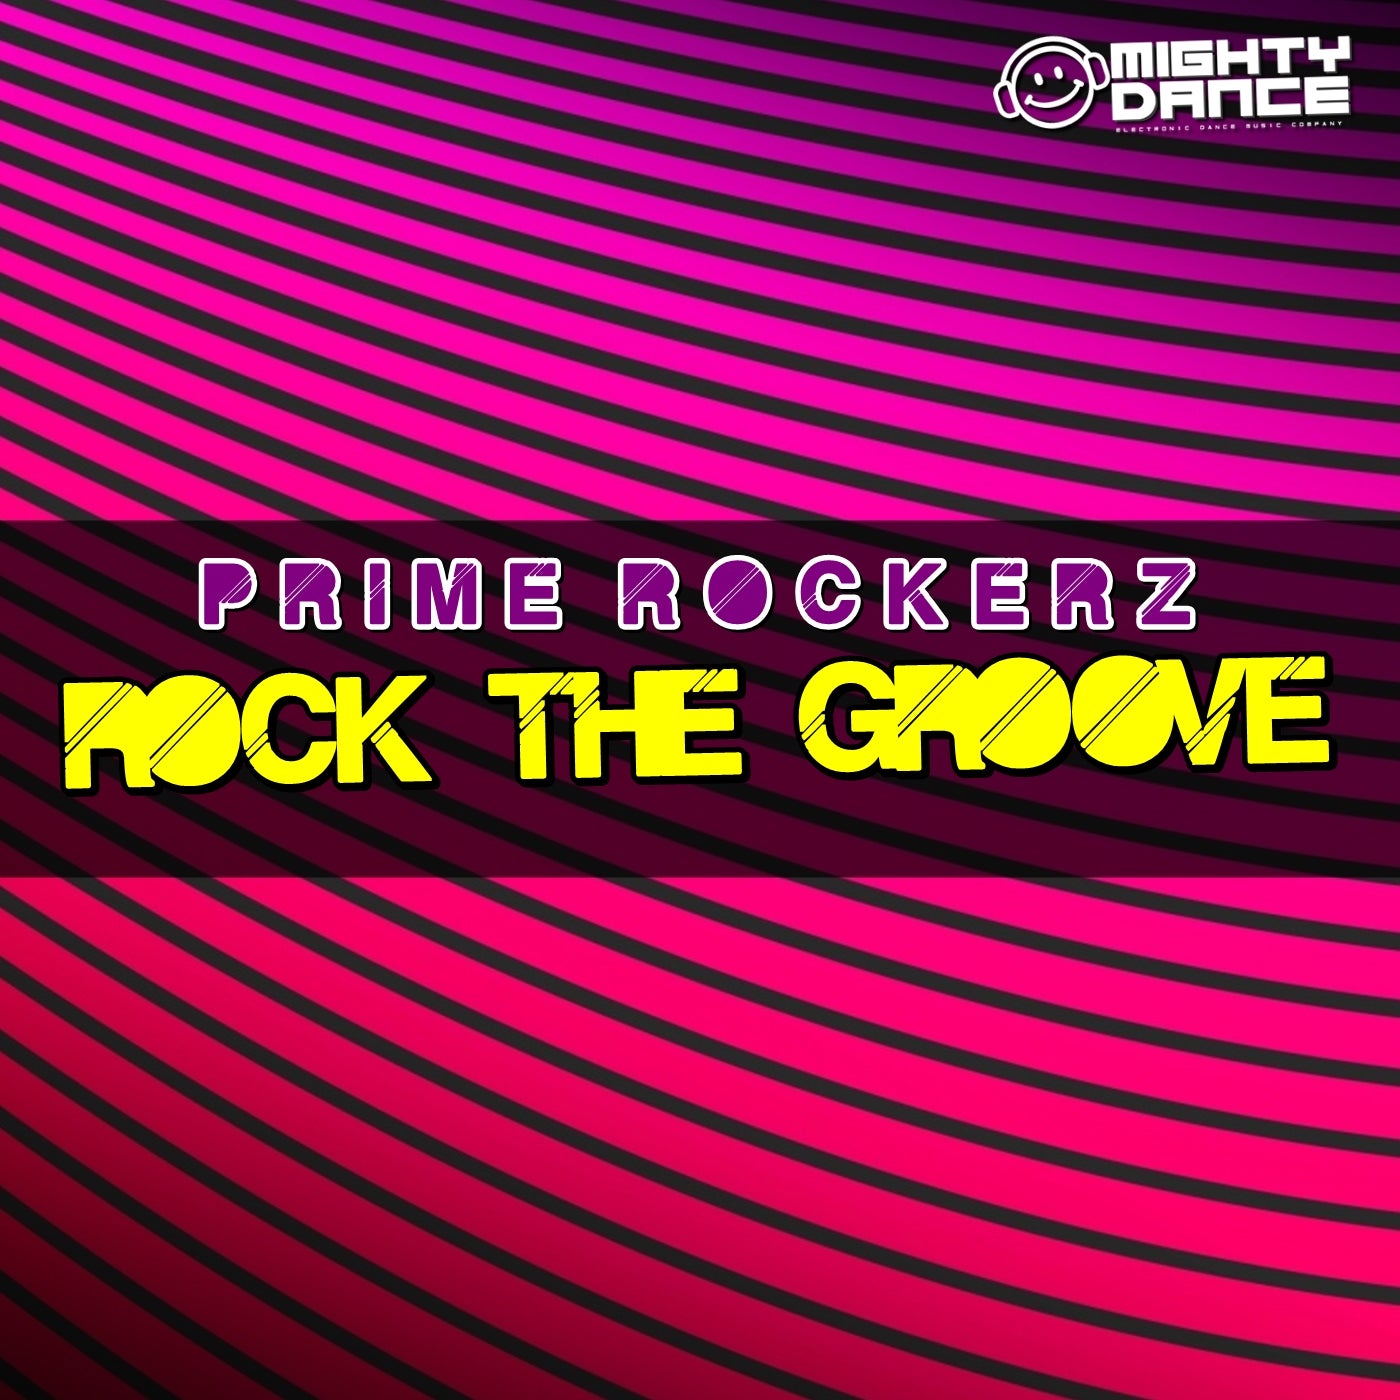 Rock The Groove